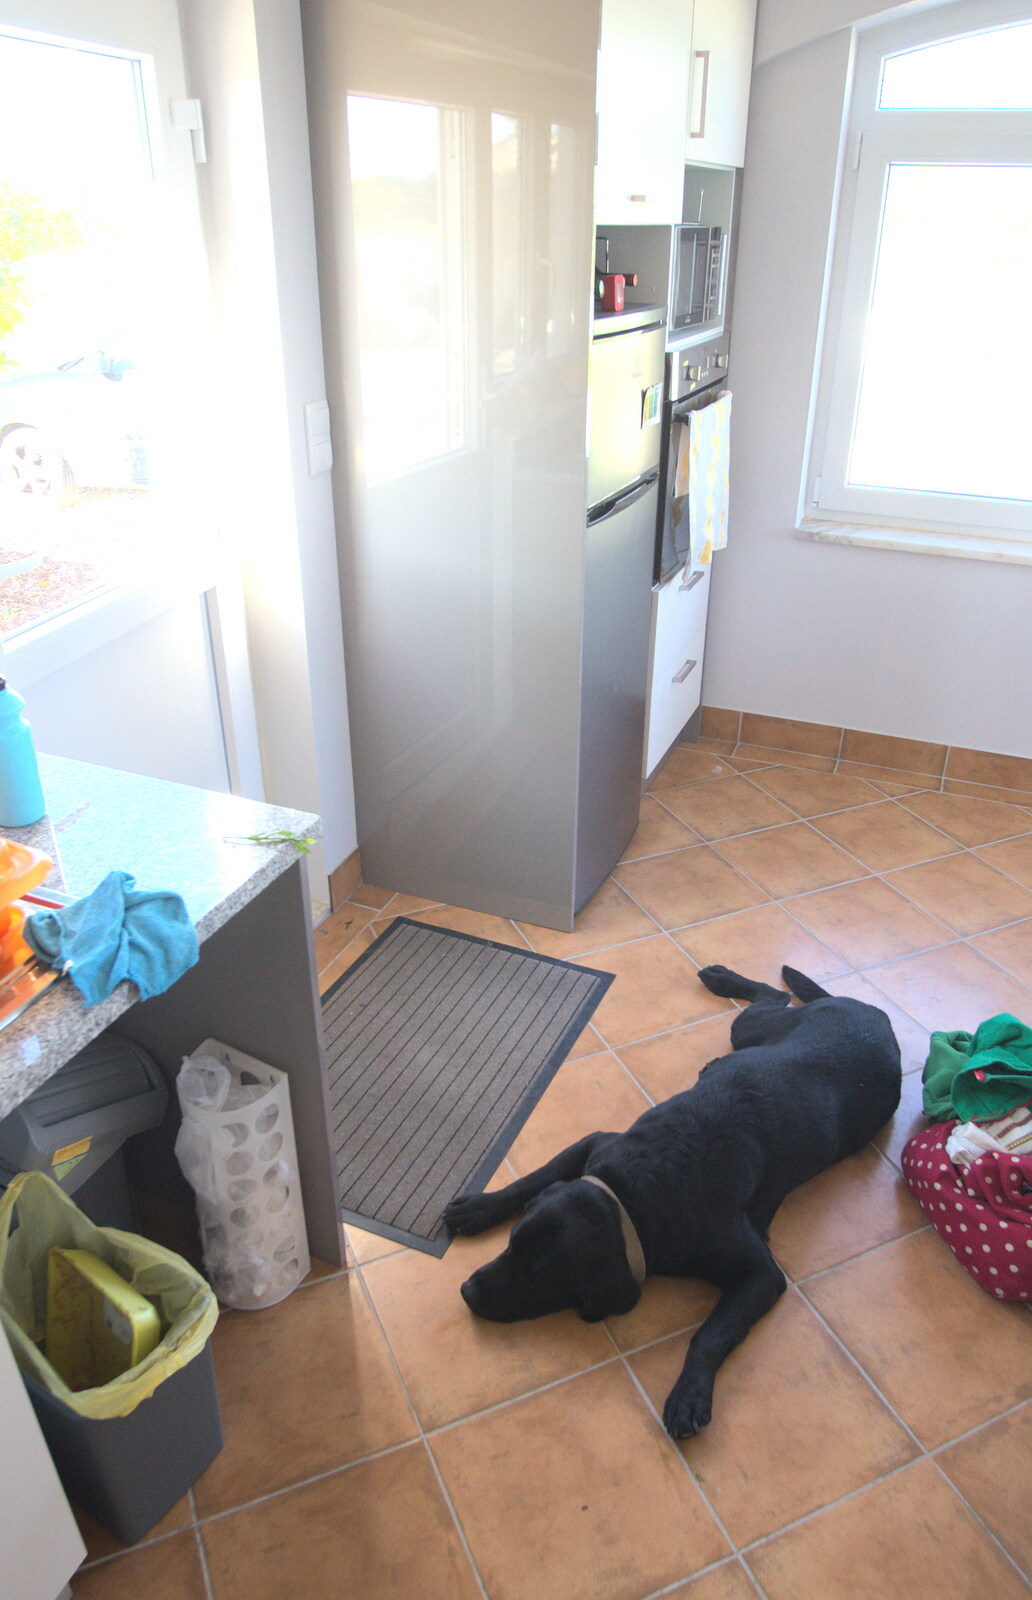 The dog has a lie down on the cool floor from Gary and Vanessa's Barbeque, Alcantarilha, Algarve, Portugal - 7th April 2016